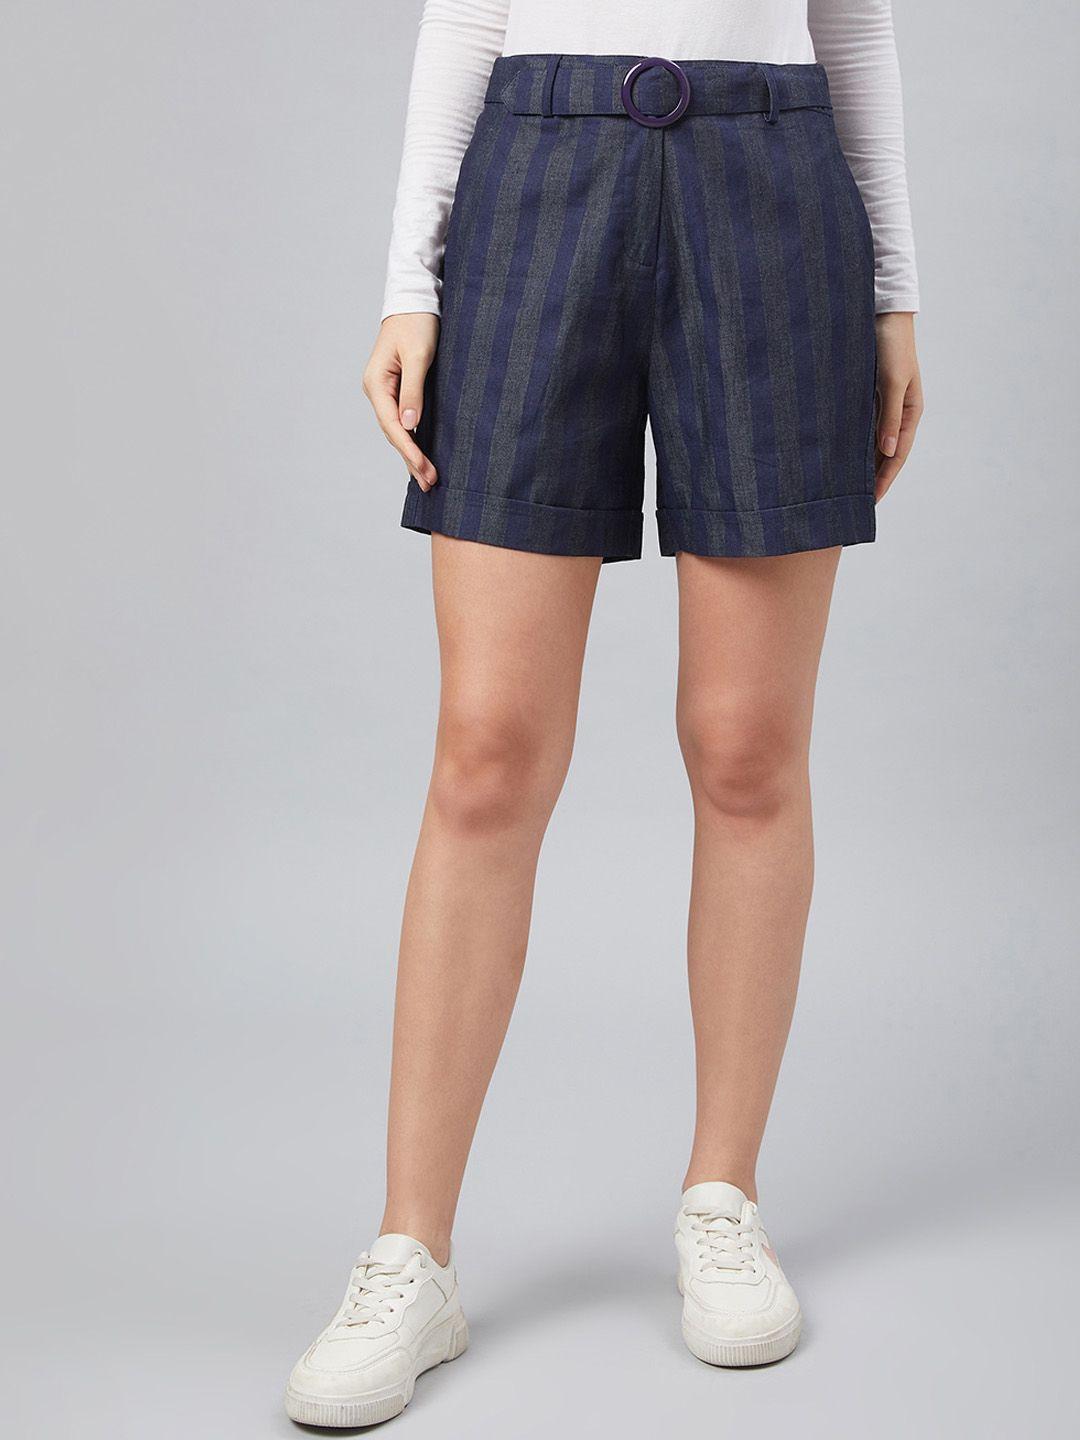 marie-claire-women-navy-blue-striped-regular-fit-shorts